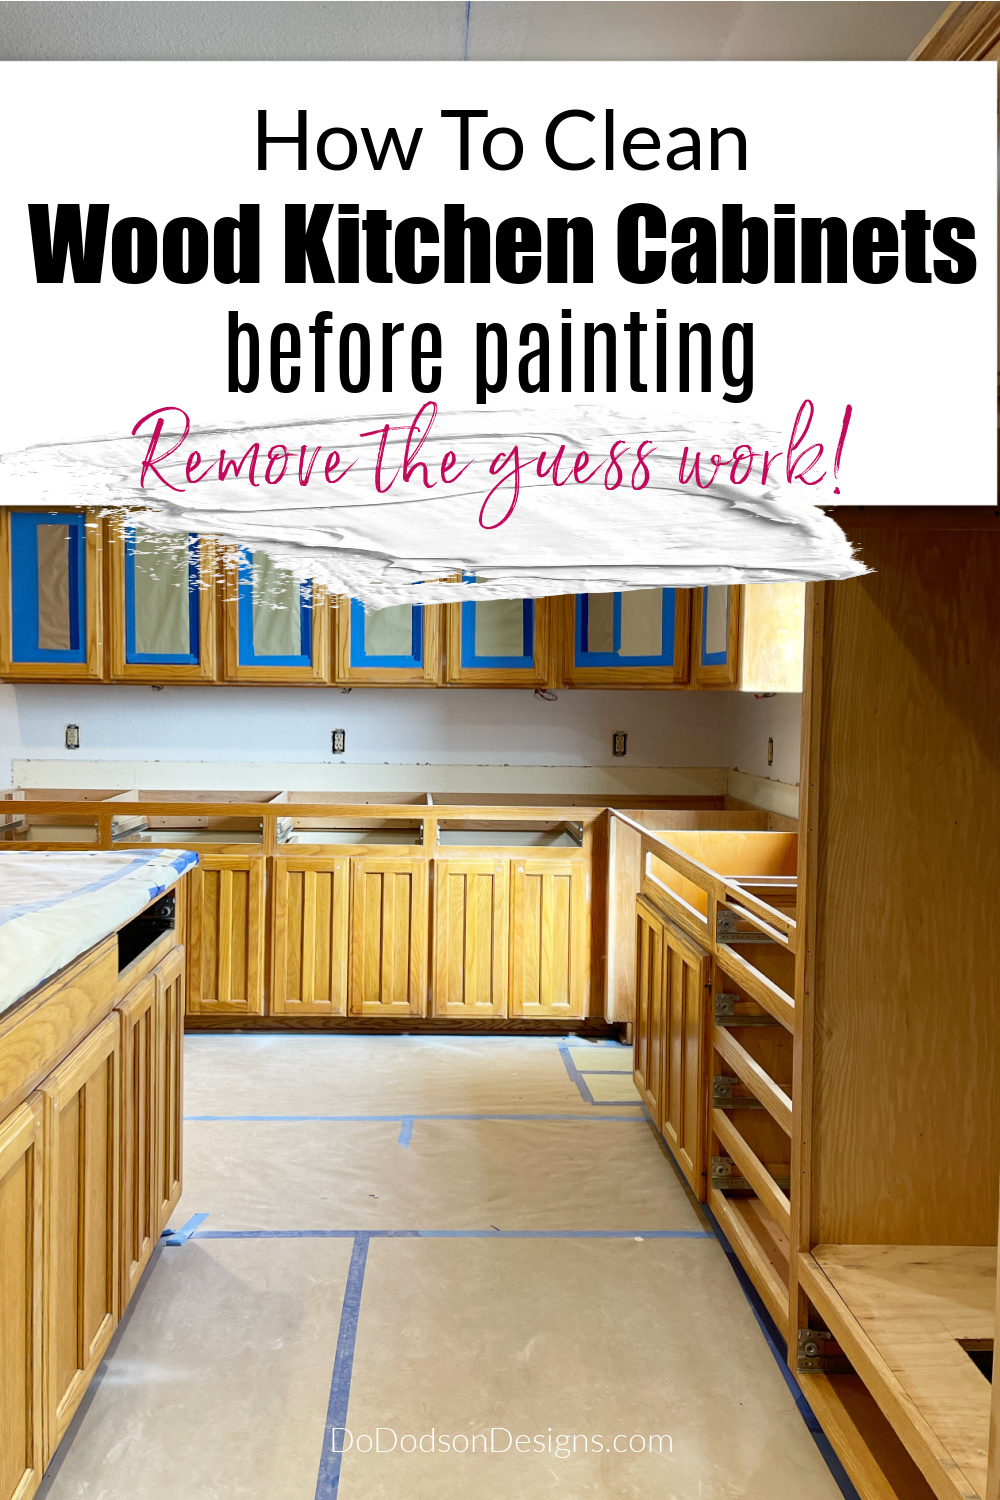 How To Clean (PREP) Wood Kitchen Cabinets Before Painting - Do